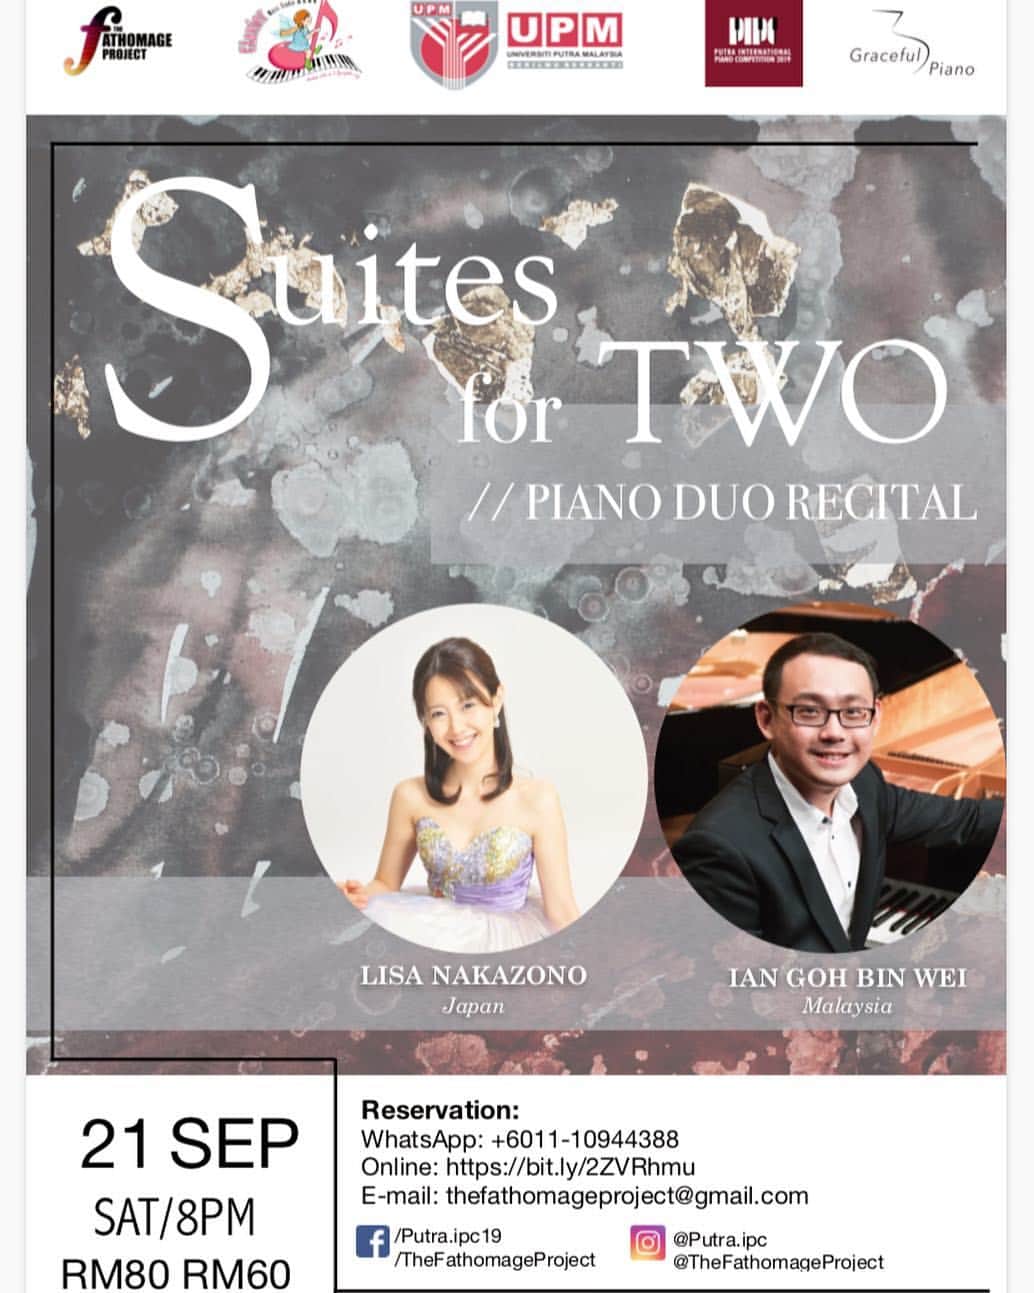 中園理沙のインスタグラム：「Happy to share with you all that I'll be having a piano duo concert with my good friend, Mr. Ian Goh @ian.goh64. He is a world-renowned musician who has devoted and contributed to the classical music education of the people in Malaysia. Looking forward to seeing you all in September 🤗 Check out the organizer's page @putra.ipc and @thefathomageproject ! 【Program】 Arensky: Suite No. 2  Rachmaninov: Suite No. 2  Bennett: Four piece Suite , etc. 皆様、こんばんは！以前、プトラ国際ピアノコンクールの審査員をさせて頂く事になった旨お知らせ致しましたが、今回はその続編です。この夏、私の友人であり、同じく審査員の1人であるピアニストGoh氏と、マレーシアにて2台ピアノコンサートをする事になりました😊Goh氏は、音楽留学から帰り母国マレーシアのクラシック界の発展に力を注ぐ第一人者でありながら、各国で活躍する音楽家です(英文の中にリンクを貼ってあります！) また現地で録画出来ましたら皆様にお届けしたいと思います😊 実は、この他にも良いご報告がありますので、情報解禁日までもう暫くお待ち下さいね🤗 ・・・ ※DMは使用しておりません。 ・・・ #piano #pianist #recital #concert #pianoduo #pianoduoconcert #putraipc #malaysia #pianolove #pianoforte #classicalpianist #musicians #lisanakazono #ピアニスト #钢琴家 #音乐会 #中園理沙」